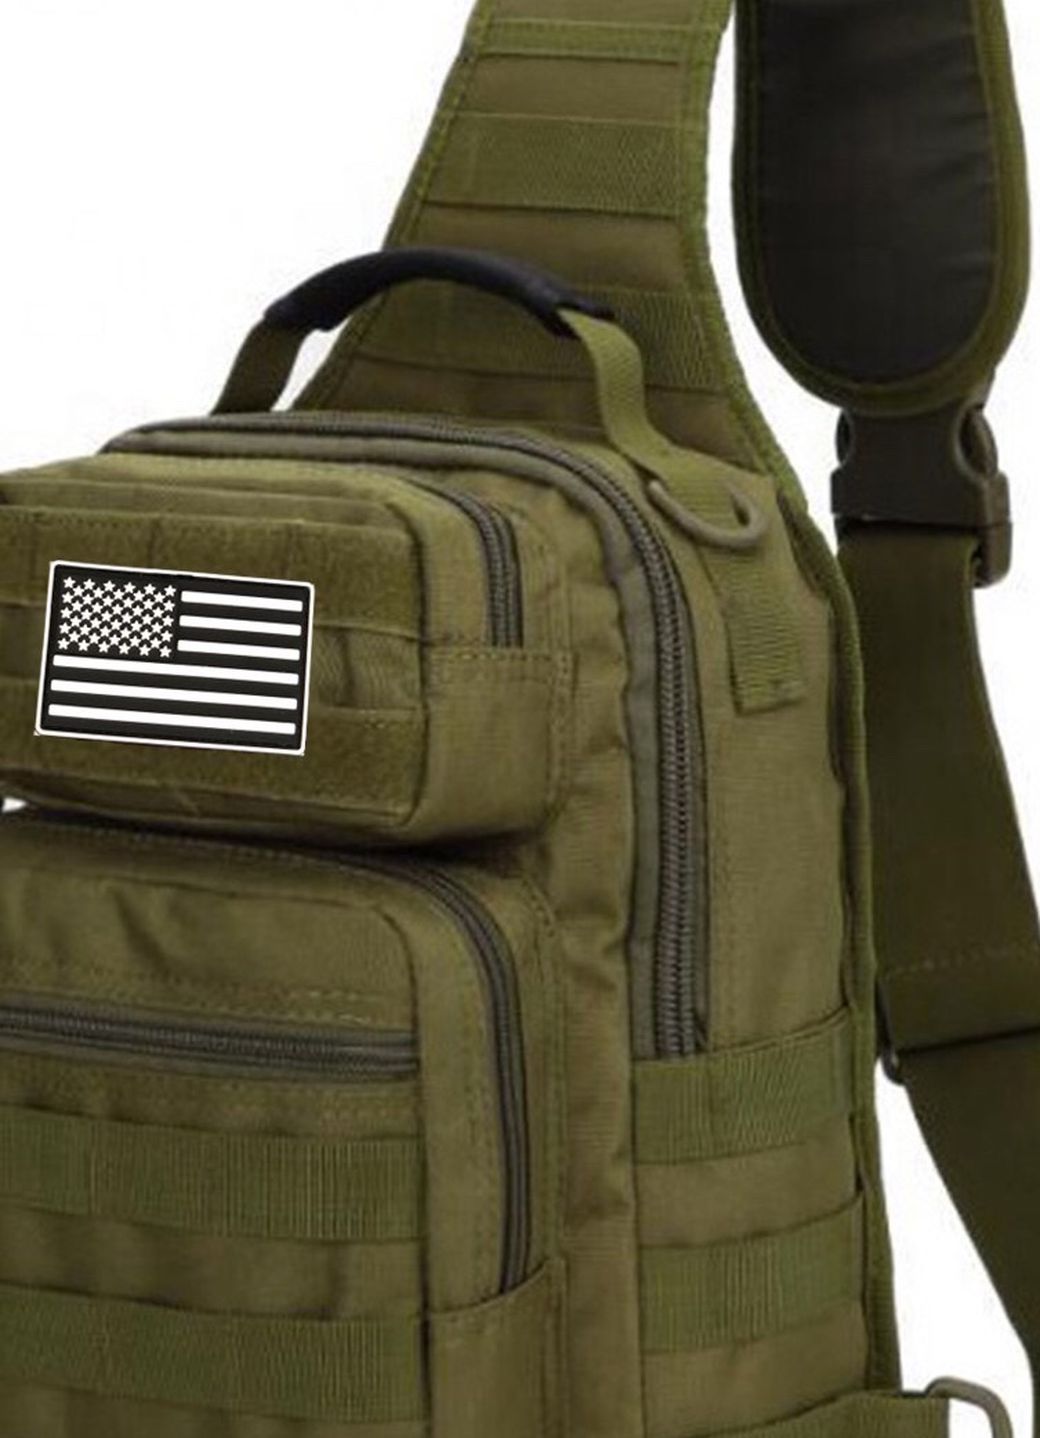 Green Tactical Sling Bag With Flag Patch - New